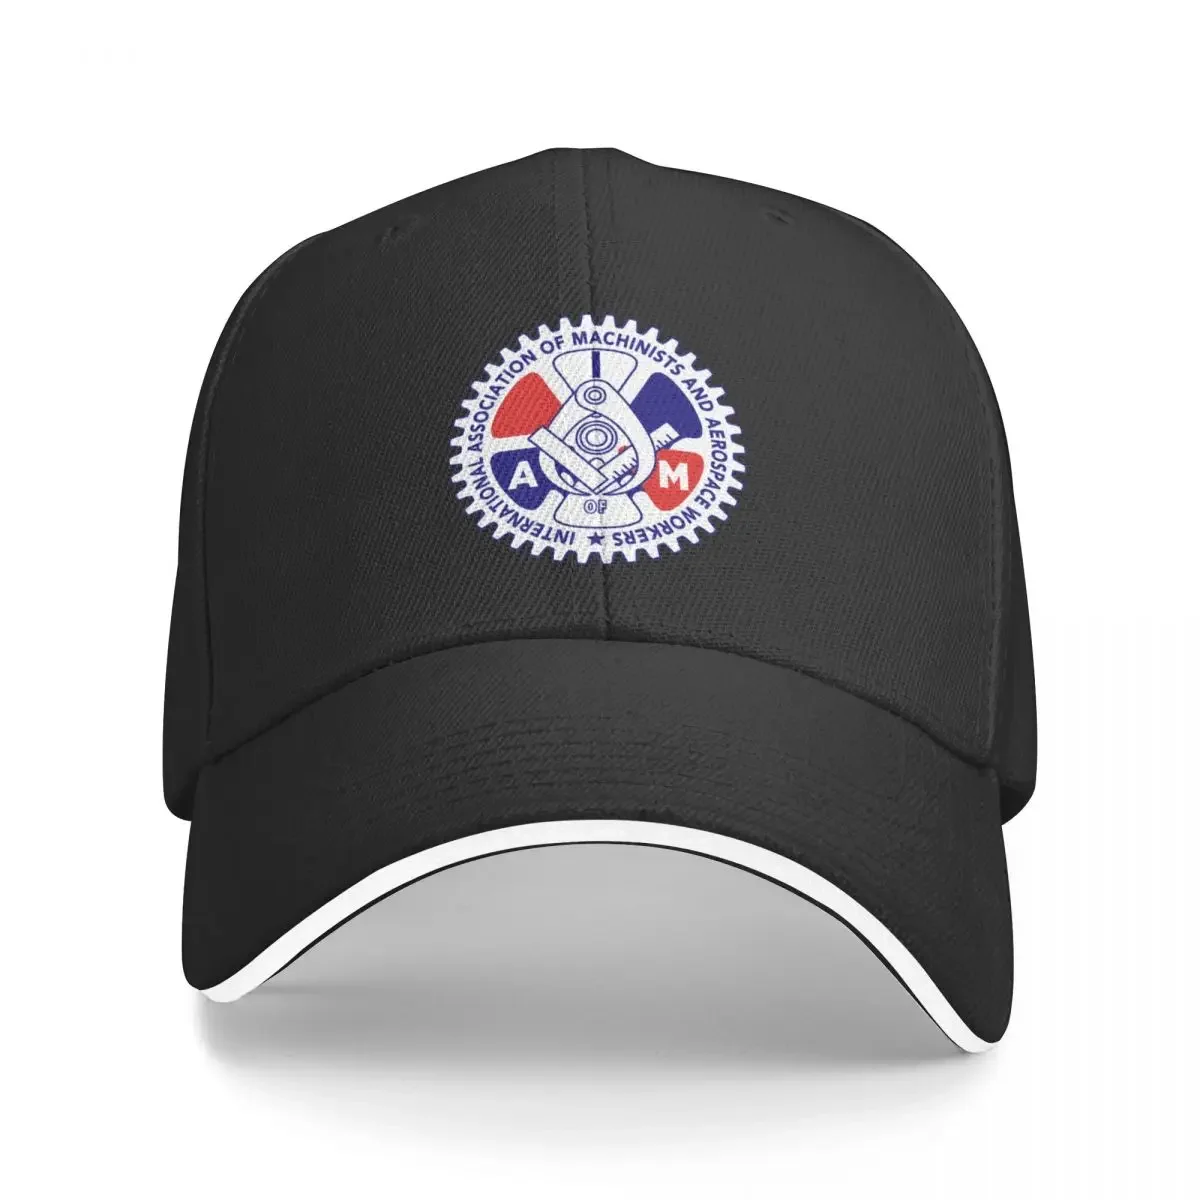 

Association of Machinists and Aerospace Workers Baseball Cap Bobble Hat funny hat Hood Beach Outing Men Golf Wear Women's